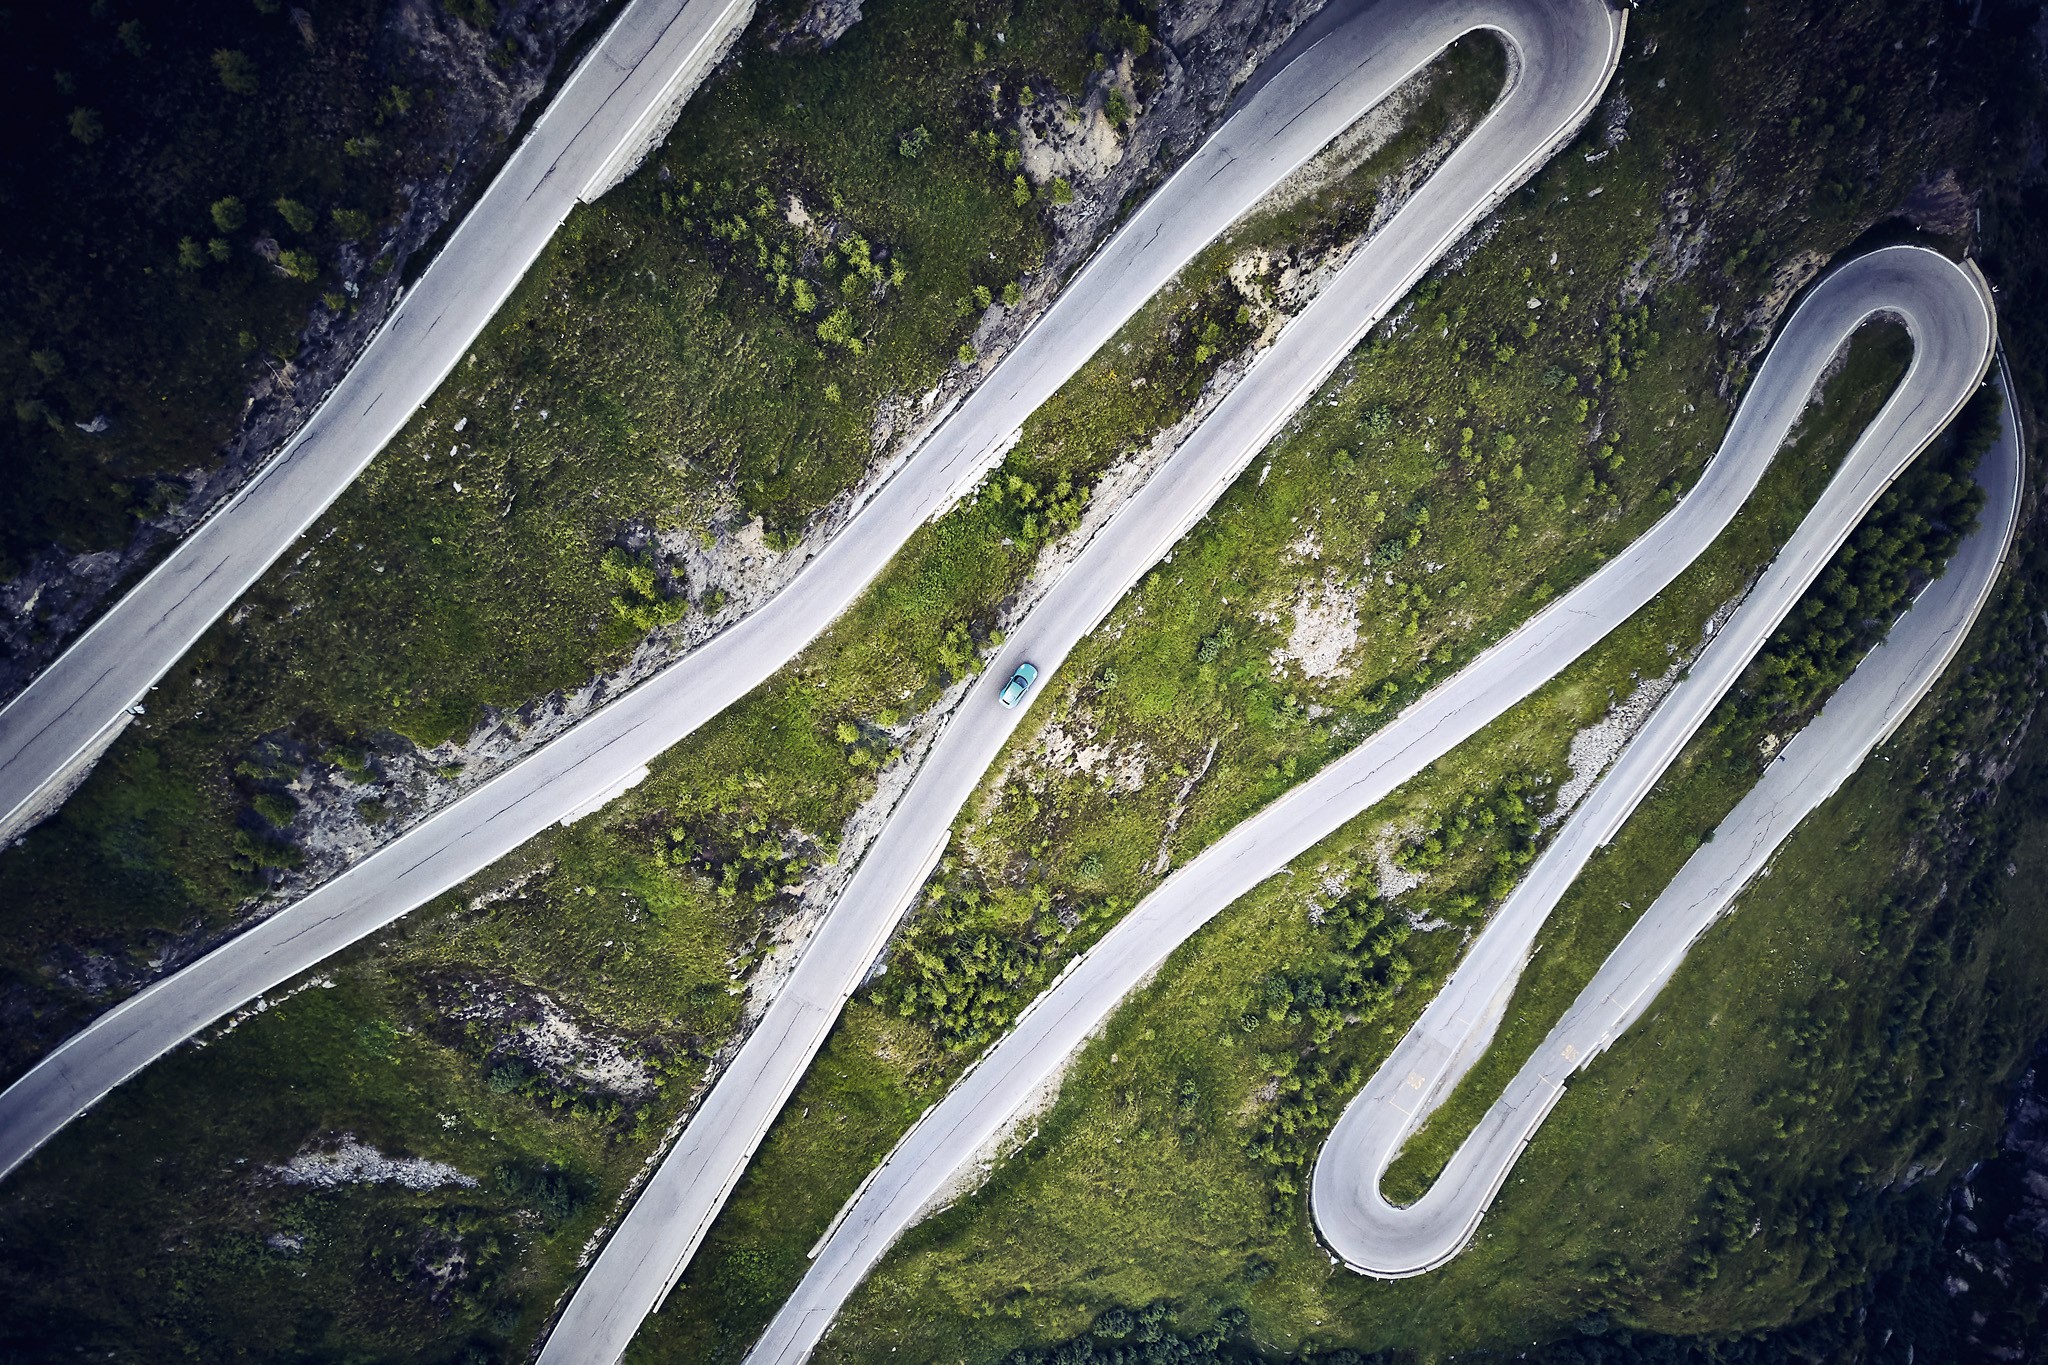 Narrow roads and tight hairpin bends